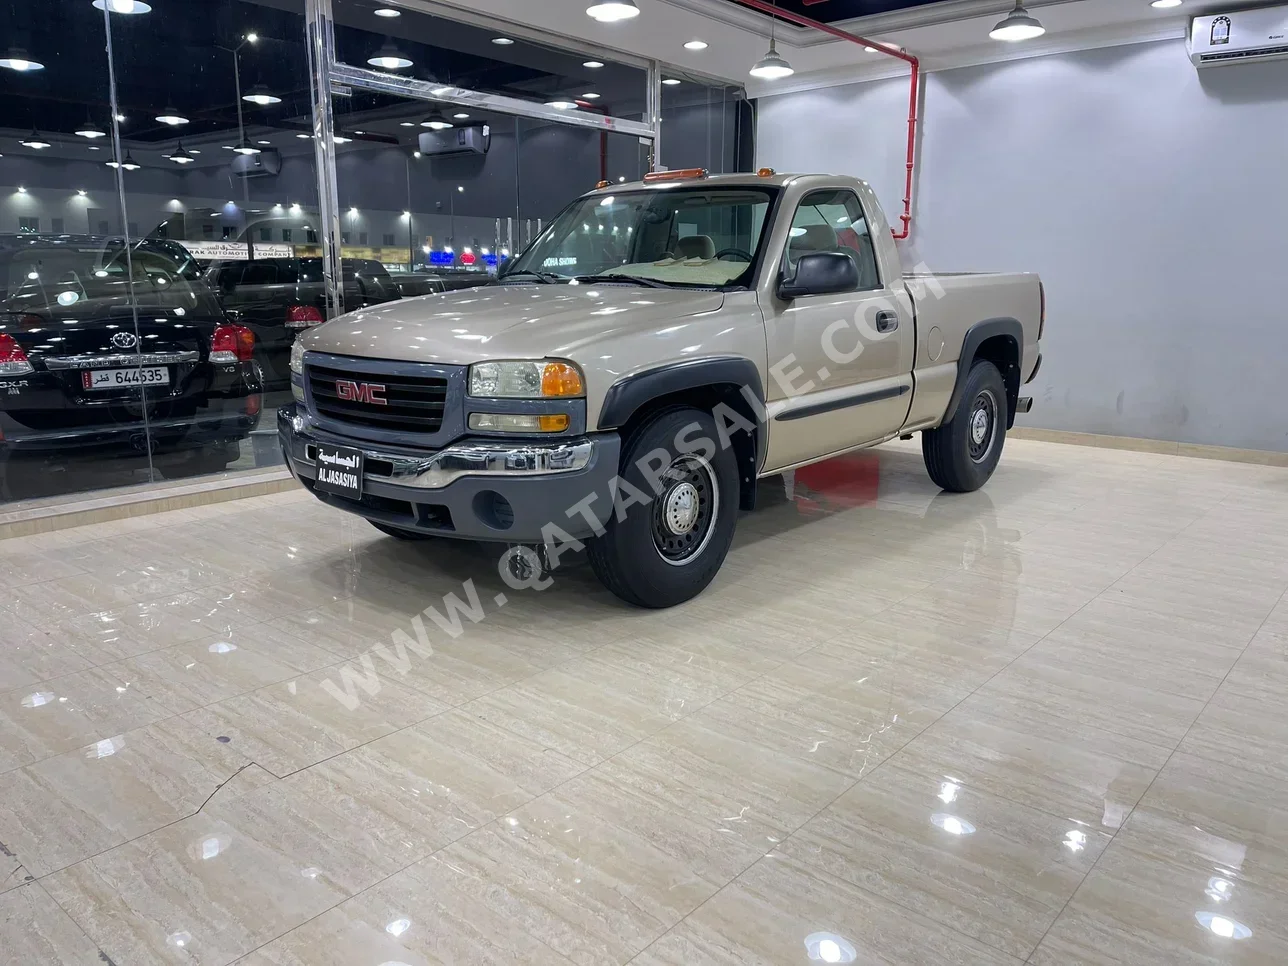 GMC  Sierra  2005  Manual  255,000 Km  8 Cylinder  Four Wheel Drive (4WD)  Pick Up  Gold